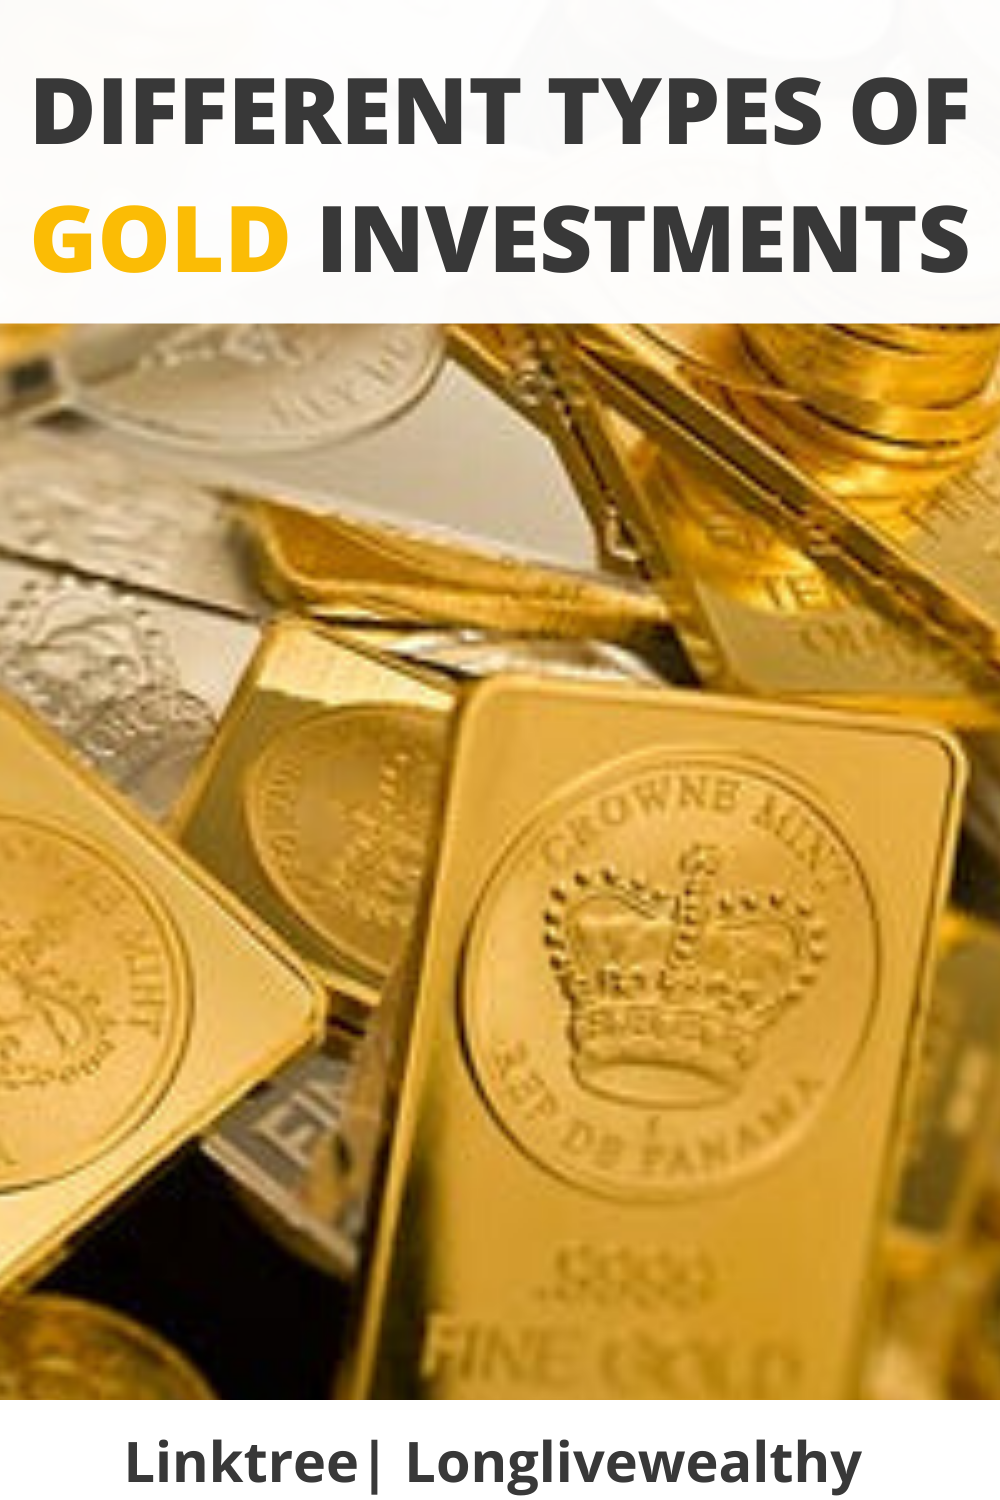 Different types of gold investments em 2020